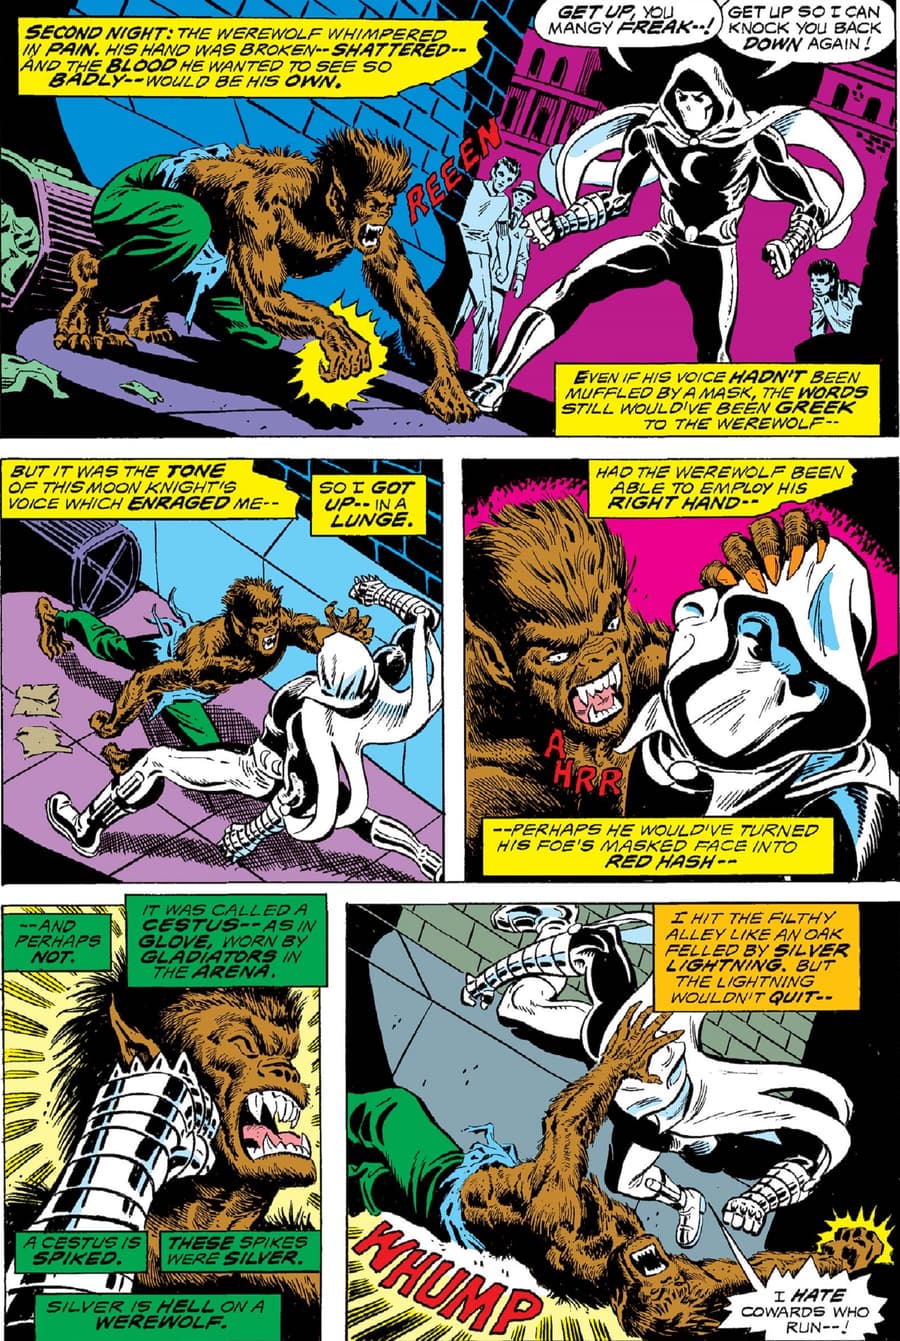 The first appearance of Moon Knight!